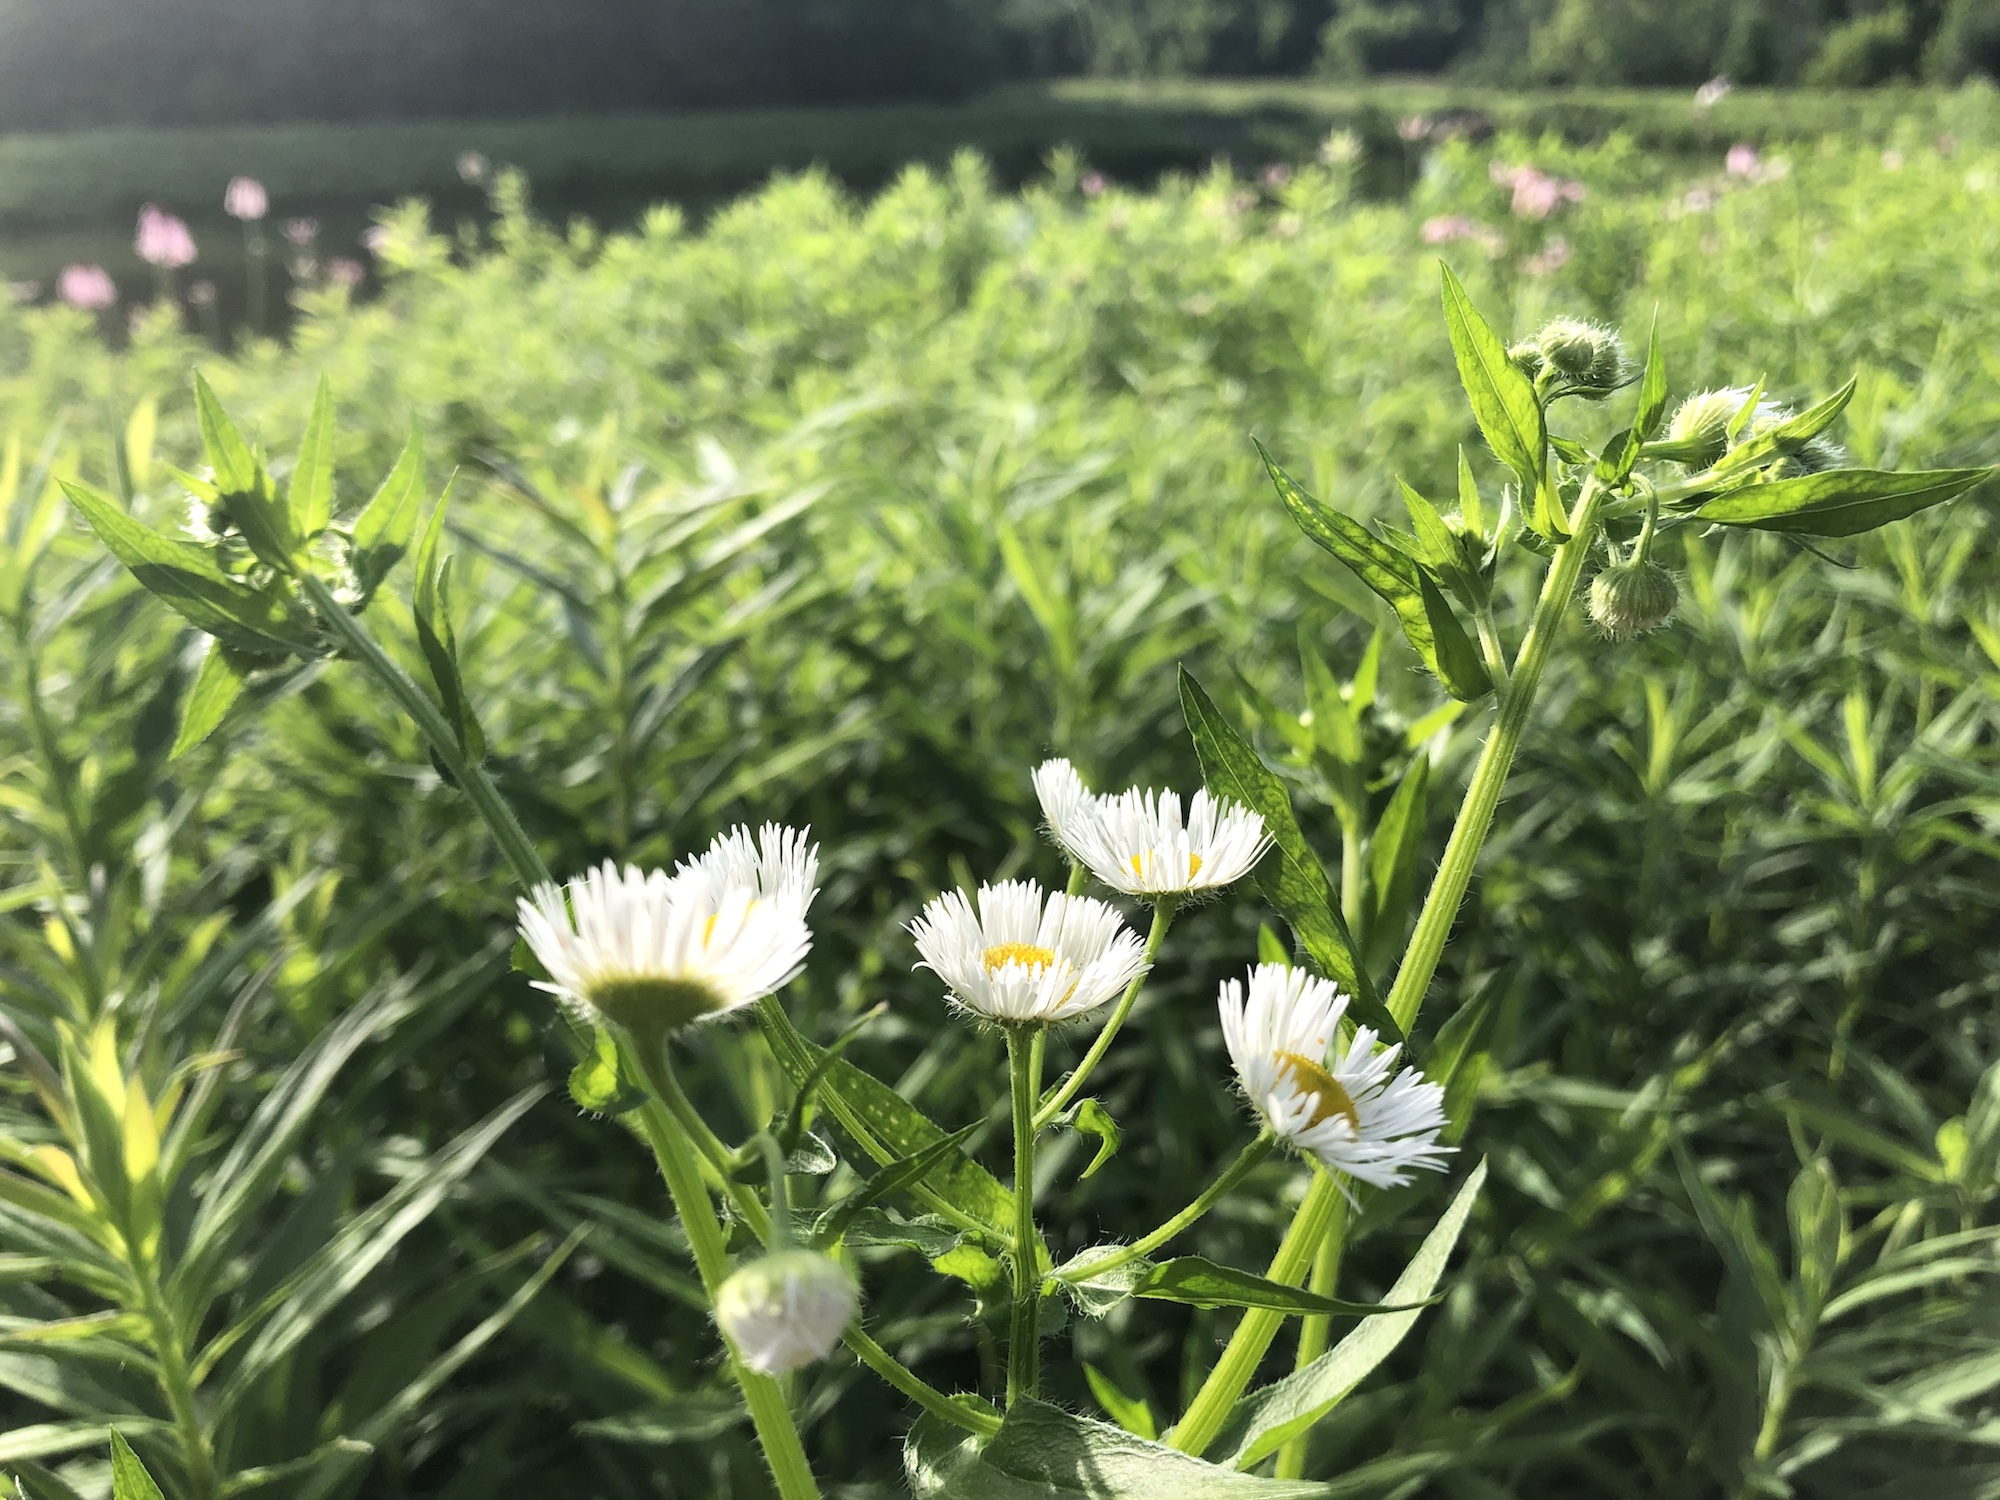 Fleabane on bank of retaining pond at the corner of Manitou Way and Nakoma Road in Madison, Wisconsin on June 26, 2019.